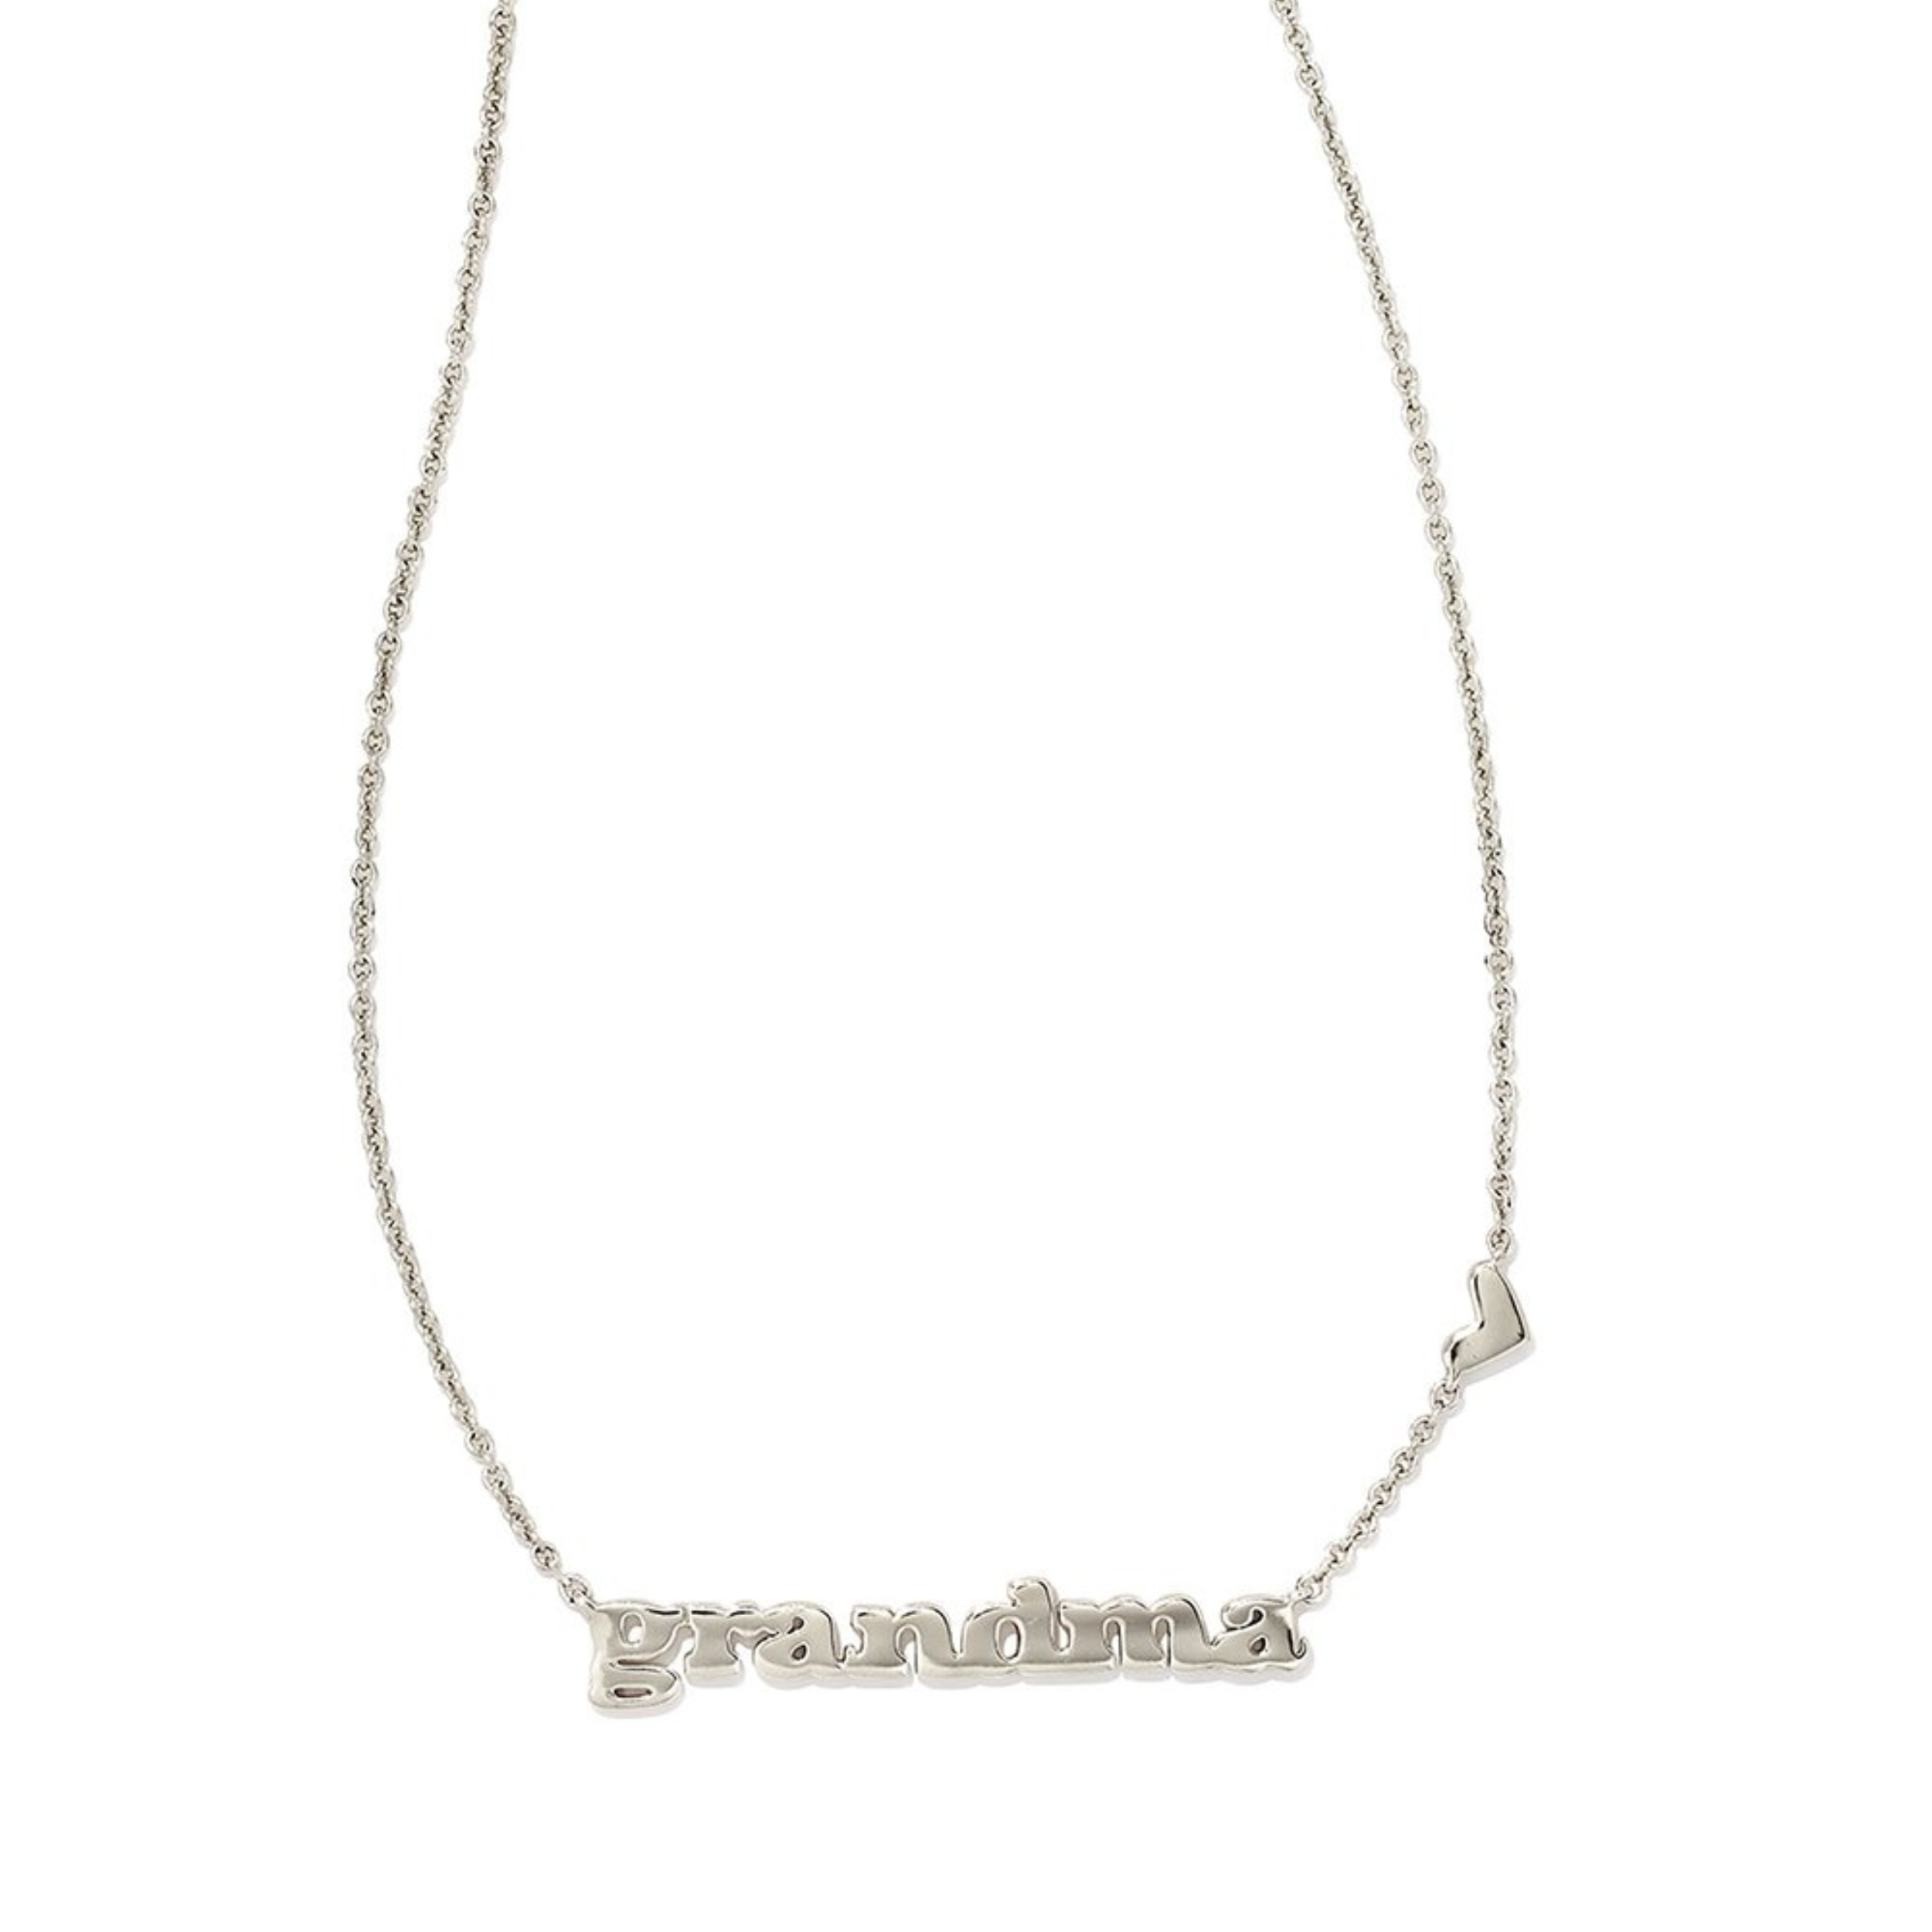 Silver necklace with the word grandma and a heart, pictured on a white background.